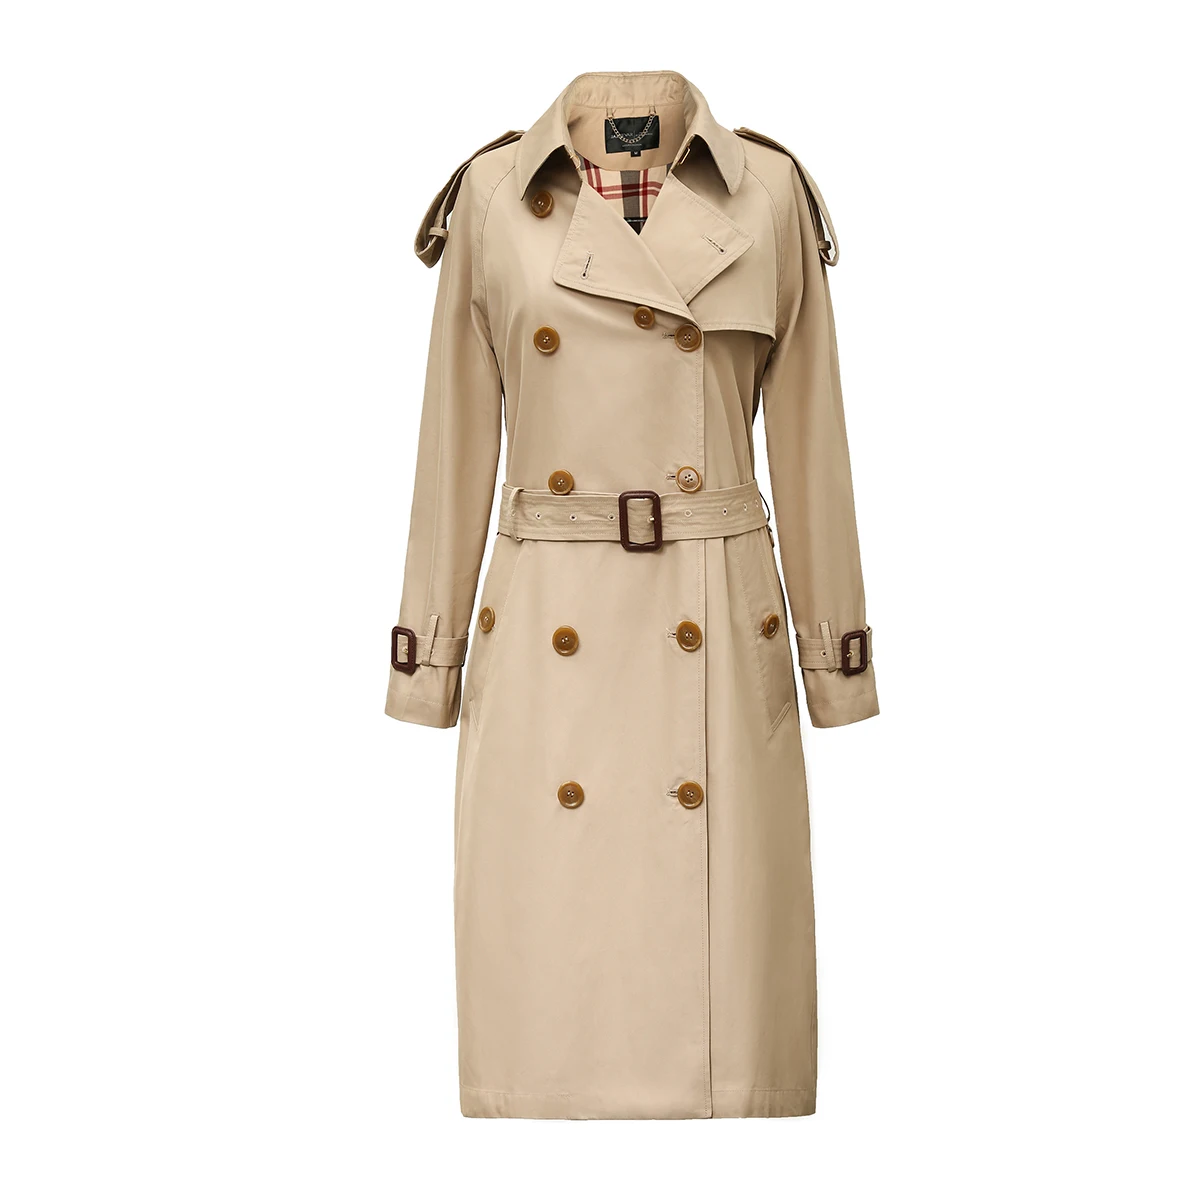 New High Fashion Women's Waterproof Cotton Long Double-breasted The Westminster Heritage Trench Coat [fila]seersucker heritage women pajamas dress